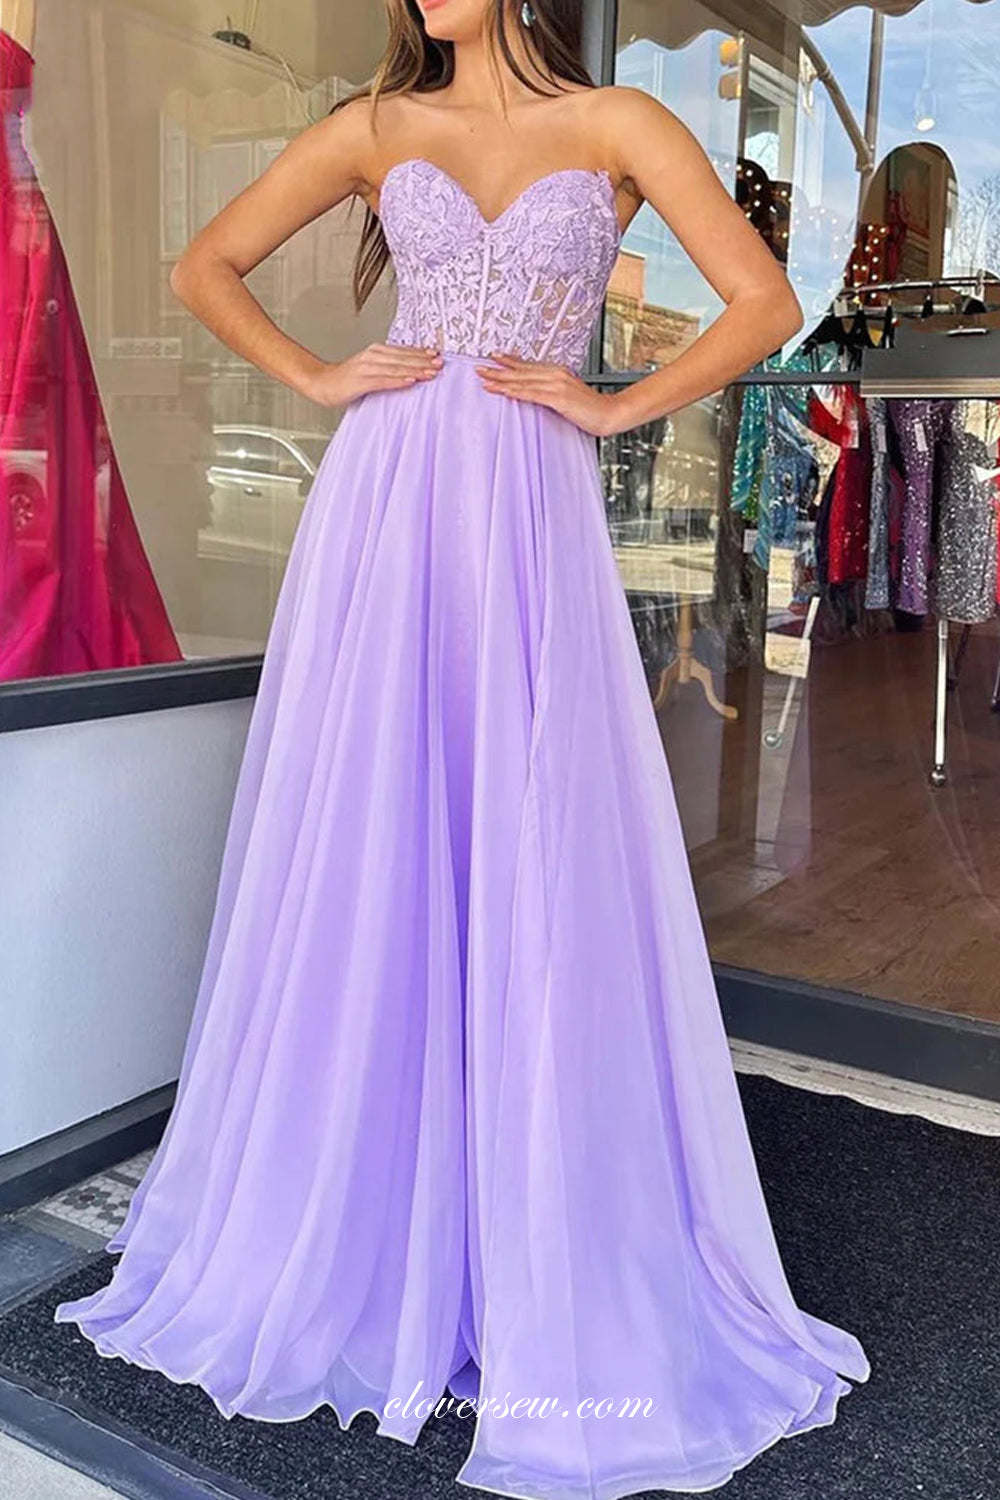 Lilac Lace Chiffon Sweetheart Strapless With Detachable Sleeves A-line Prom Dresses, CP1091